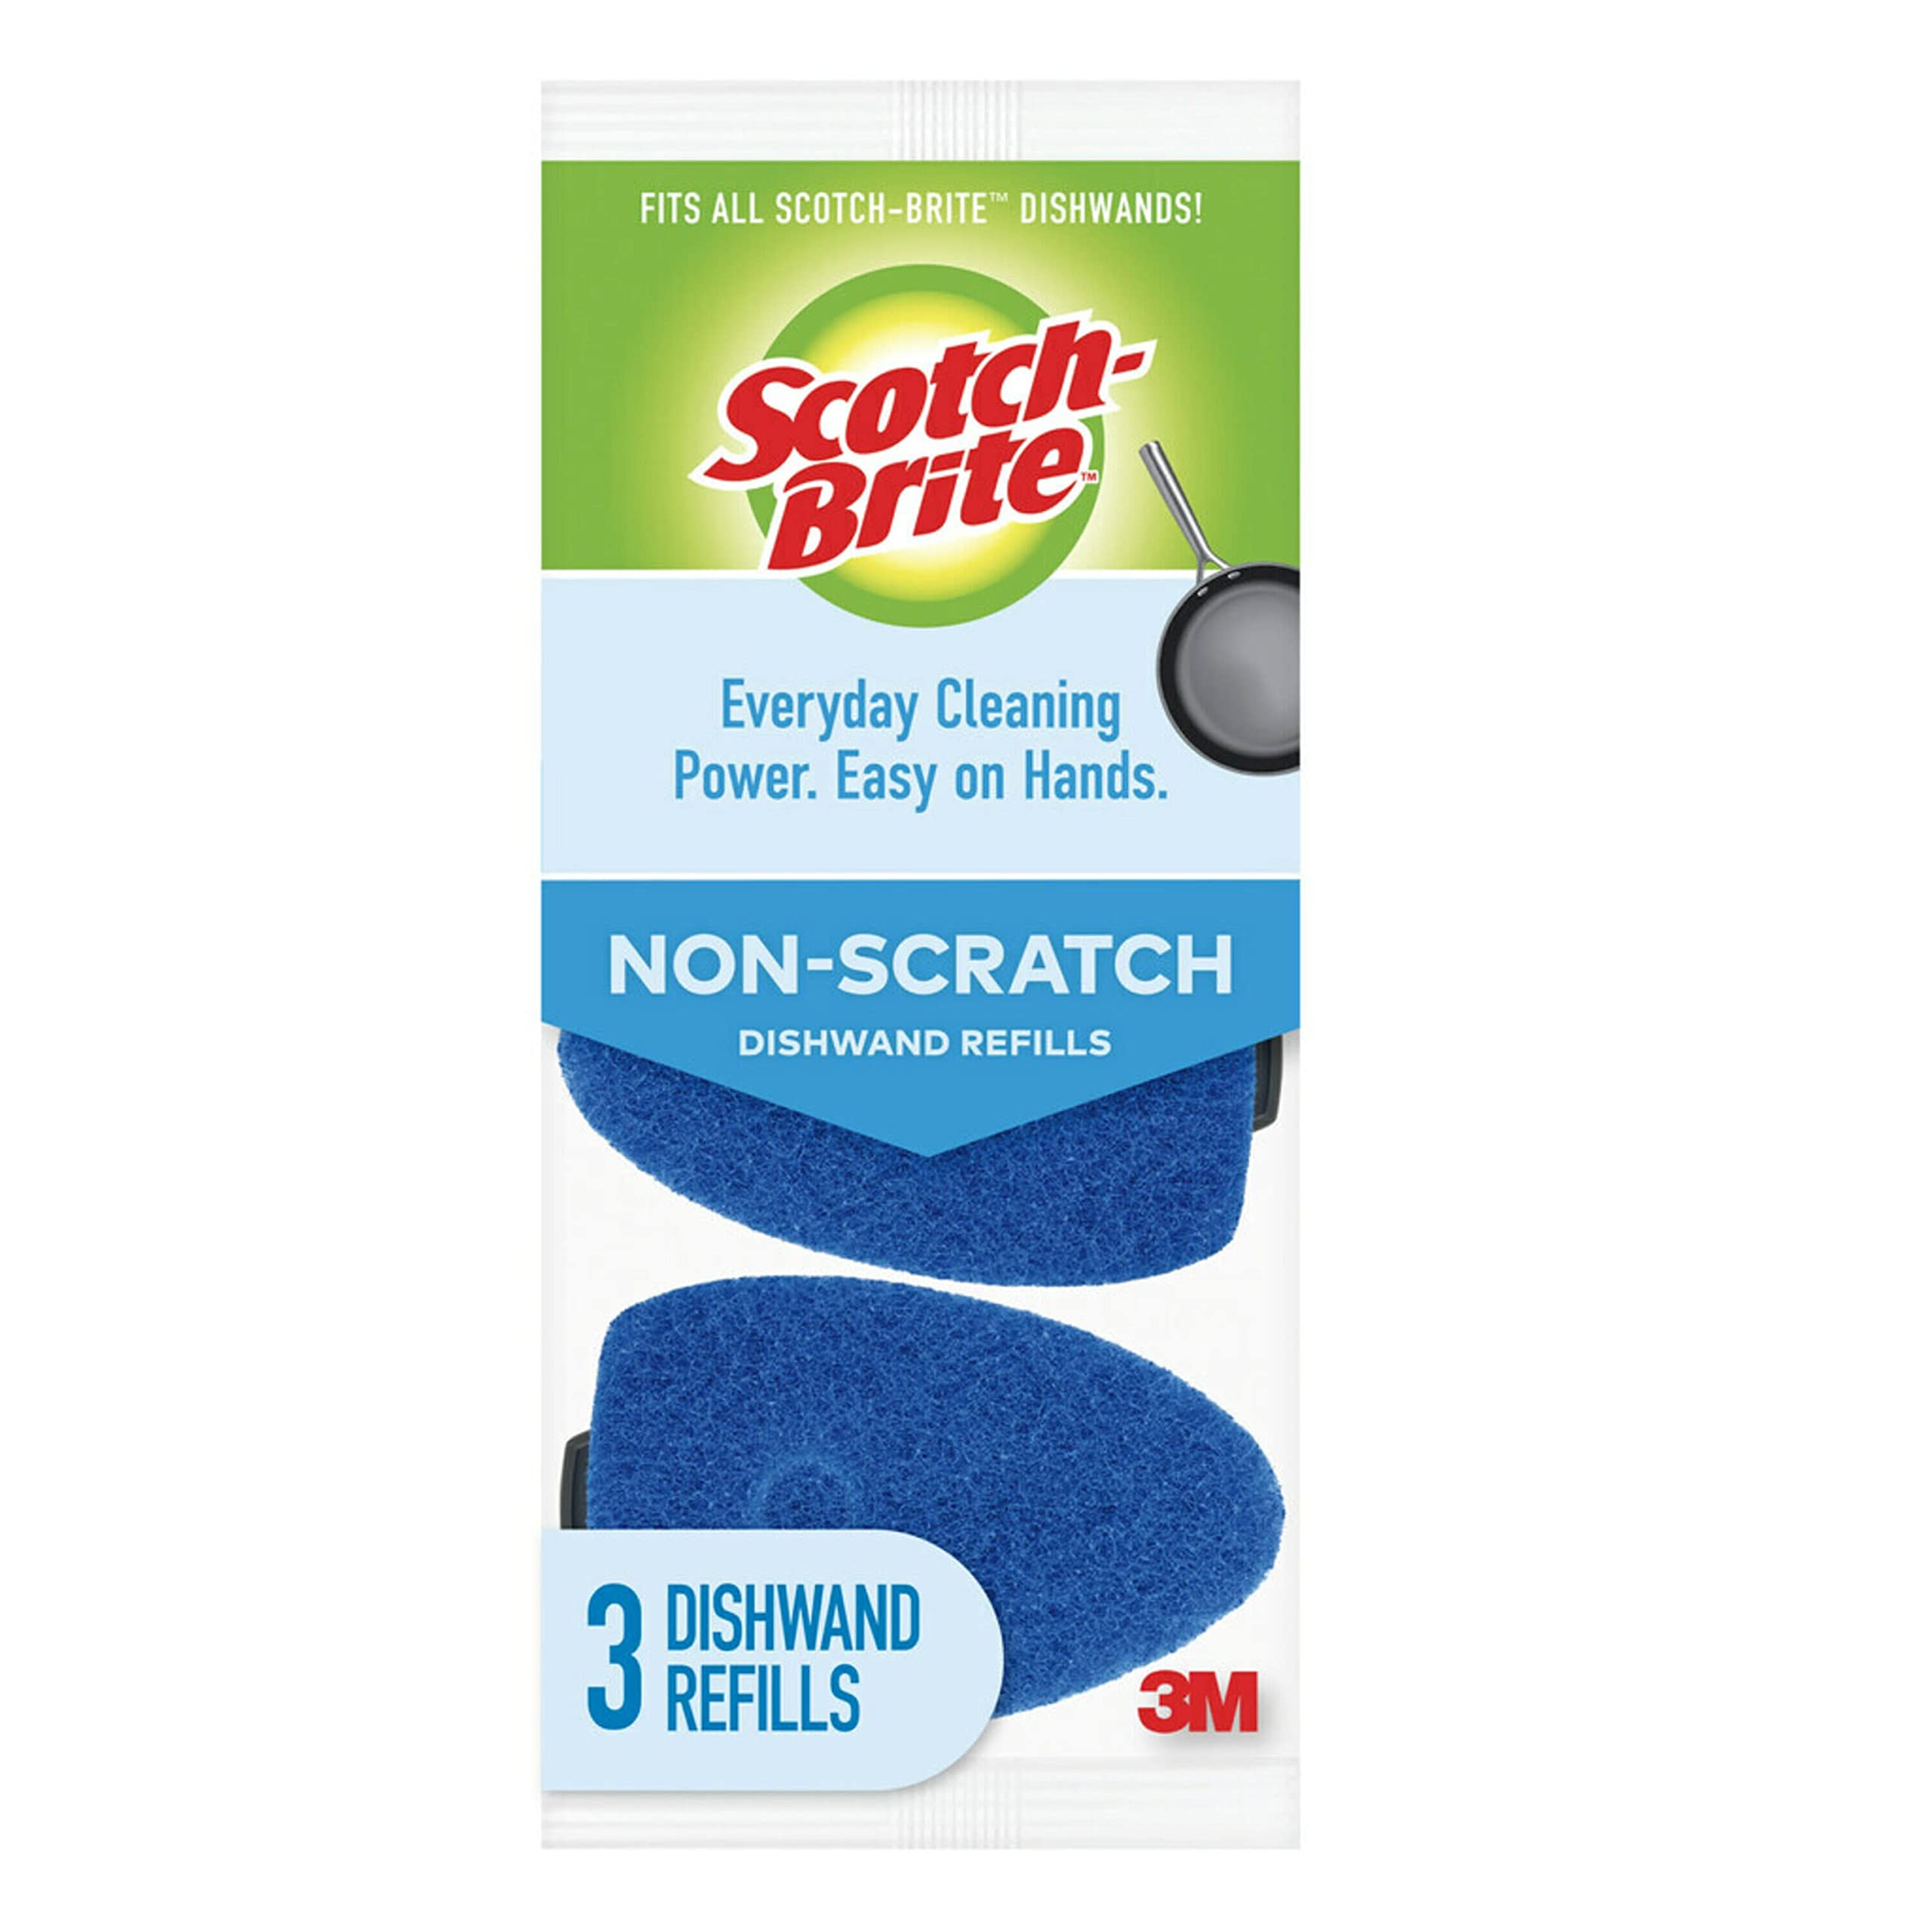 Scotch-Brite Non-Scratch Dishwand Sponge Refills, Dishwand Refills for Cleaning Kitchen, Bathroom, and Household, Non-Scratch Sponges Safe for Non-Stick Cookware, 3 Dishwand Refills